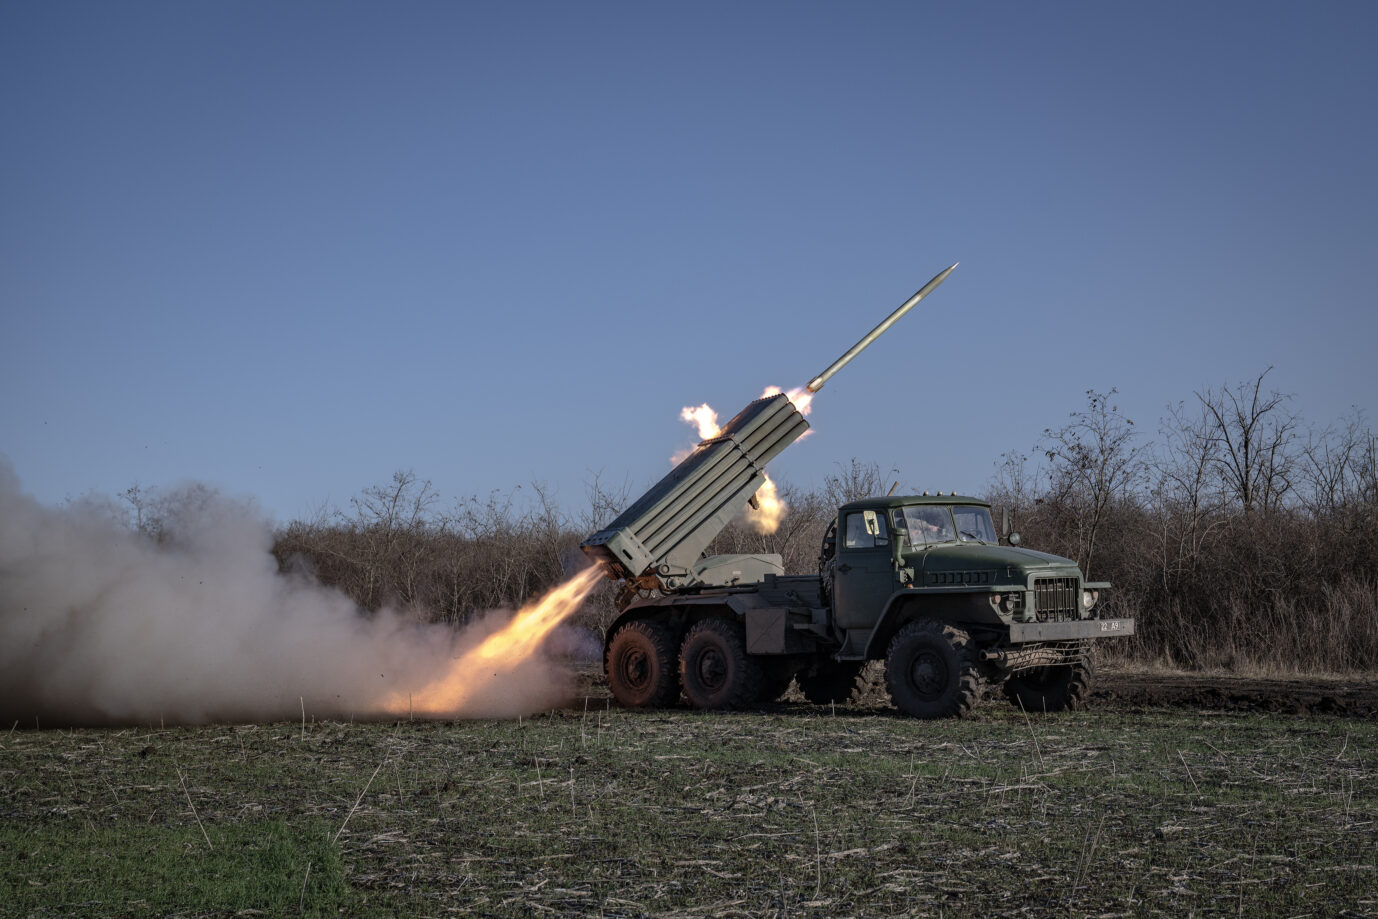 AVDIIVKA, UKRAINE - NOVEMBER 28: Ukrainian soldiers fire artillery at their fighting position in the direction of Avdiivka of Donetsk Oblast, Ukraine on November 28, 2023. Ukrainian artillery units deployed in the Avdiivka direction, where heavy clashes have been continuing due to the intensification of Russian attacks lately, continue their intense firing activities. Trying to repel the attacks of Russian troops, the Ukrainian army defends the frontlines by continuing its air and land shooting activities. Ozge Elif Kizil / Anadolu